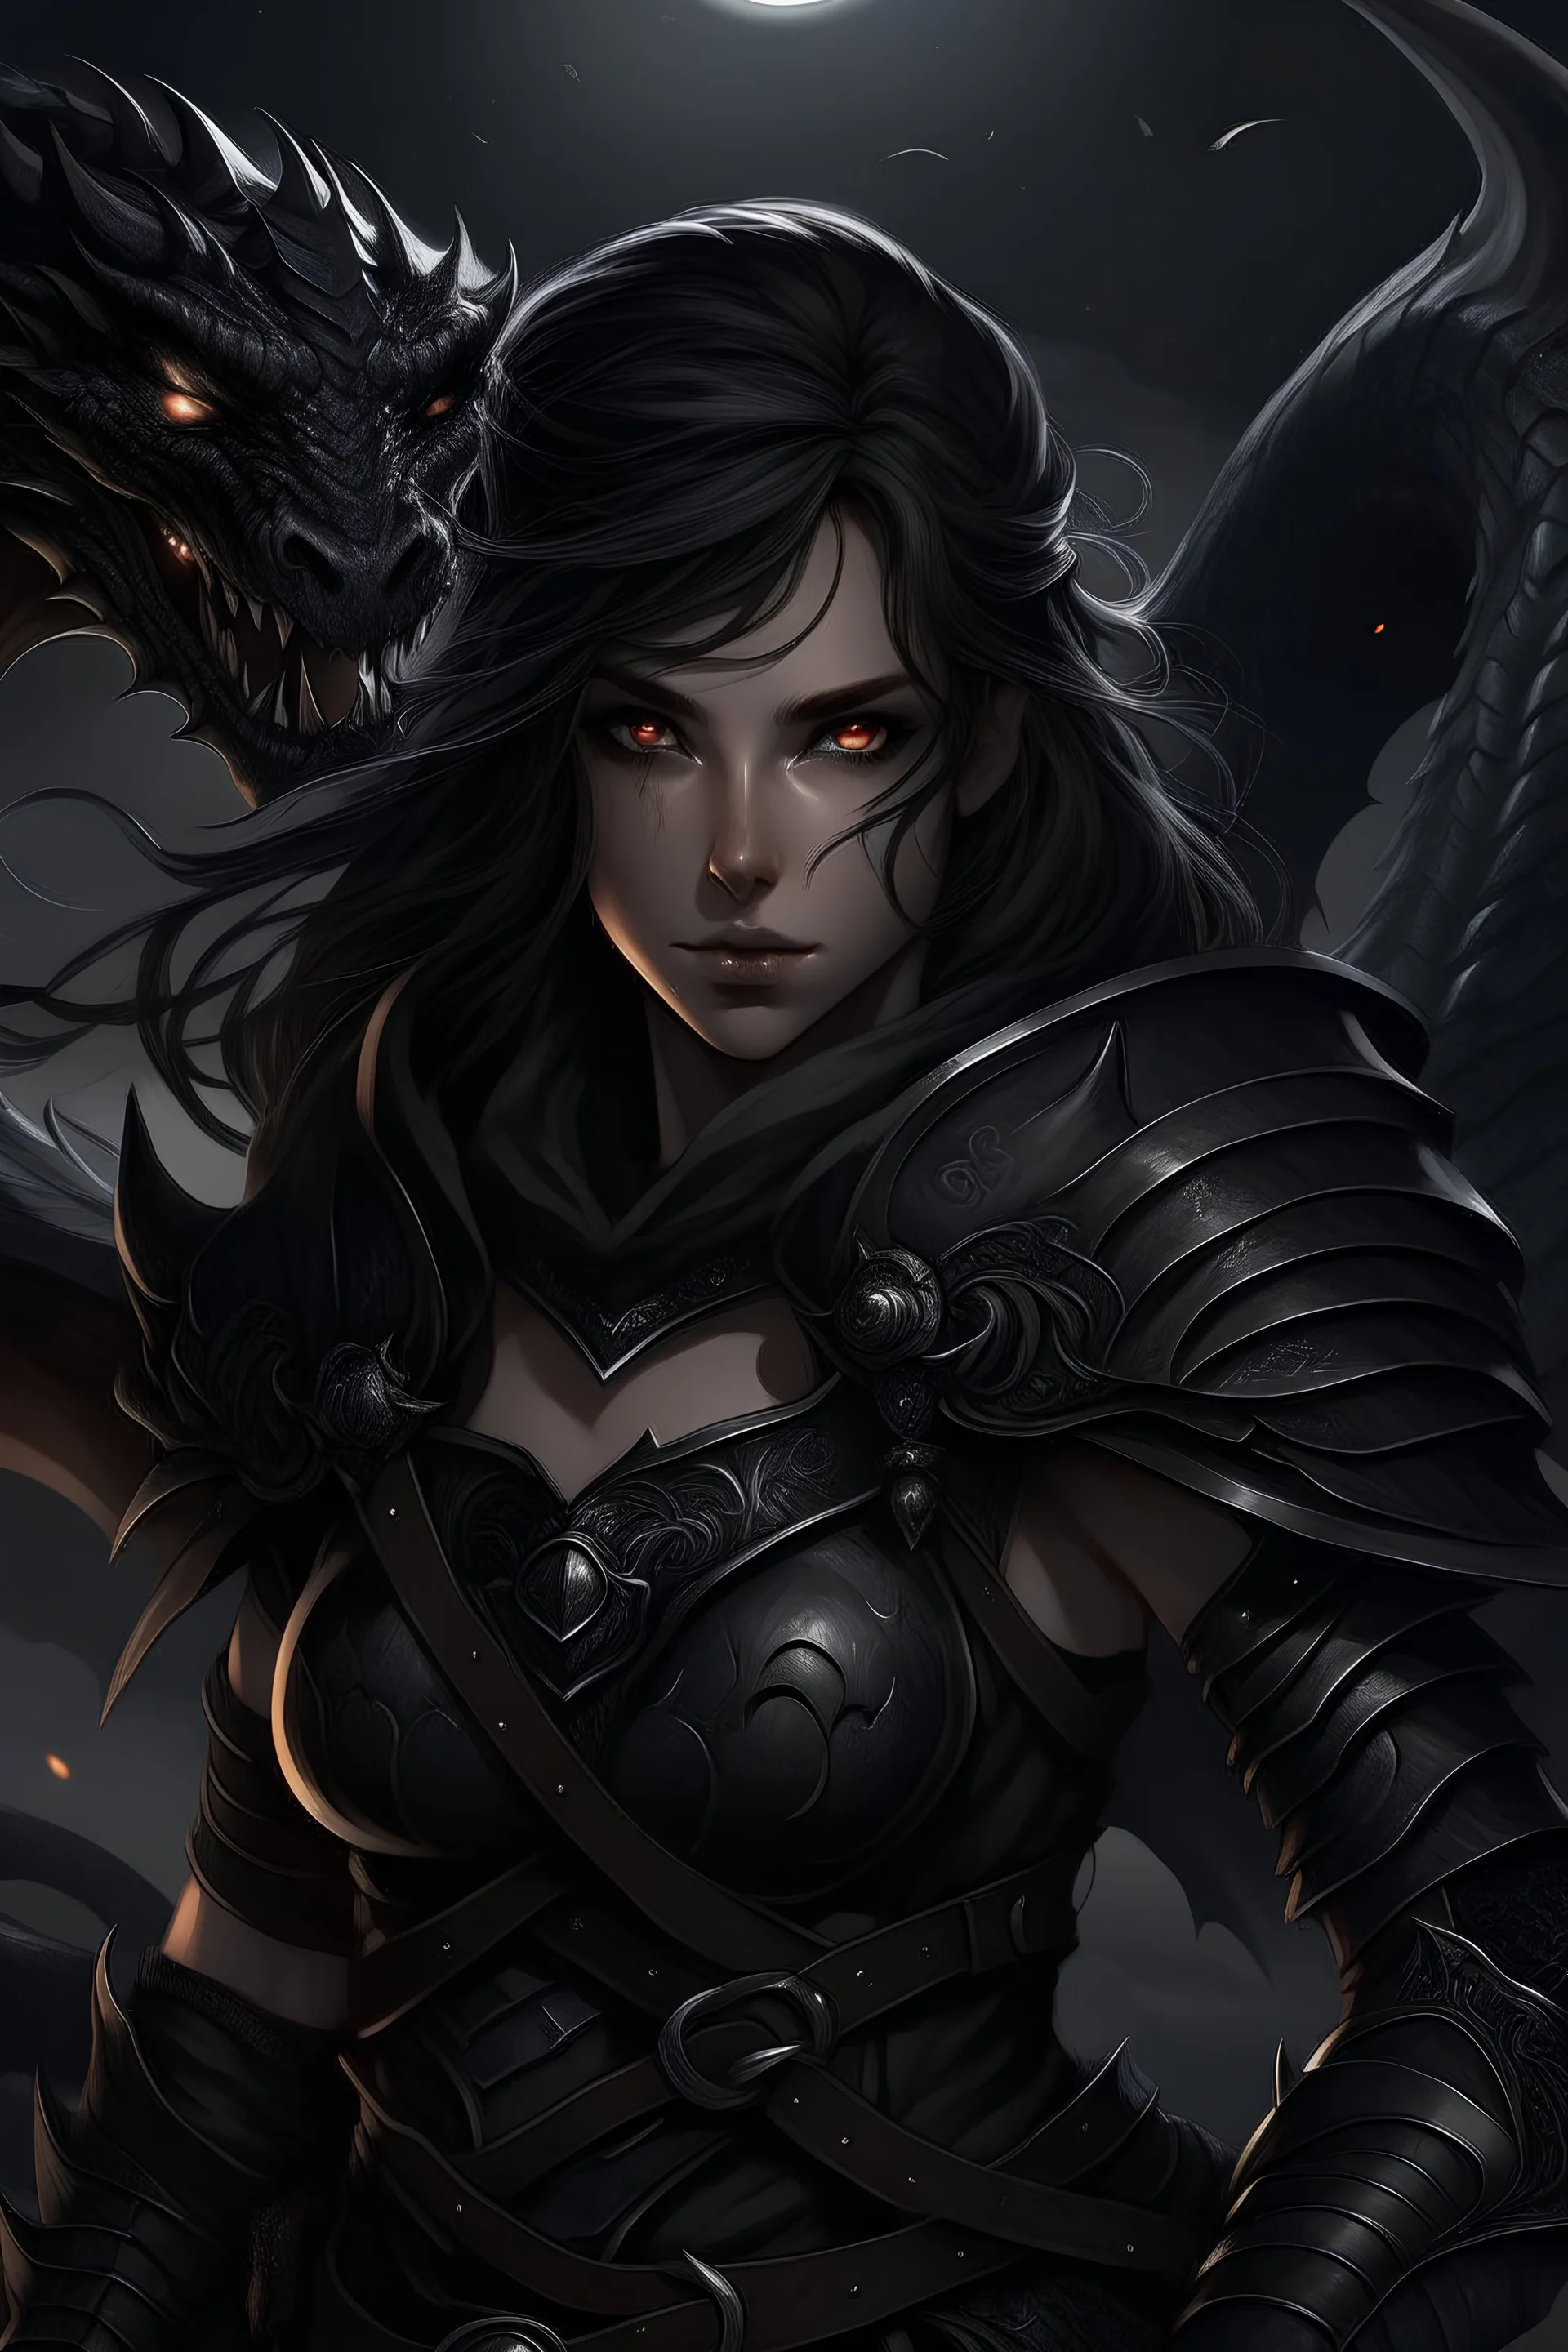 A warrior with wavy hair, her hypnotic eyes piercing the darkness, her black armor shining in the moonlight, a black dragon appearing behind her, ready to attack.